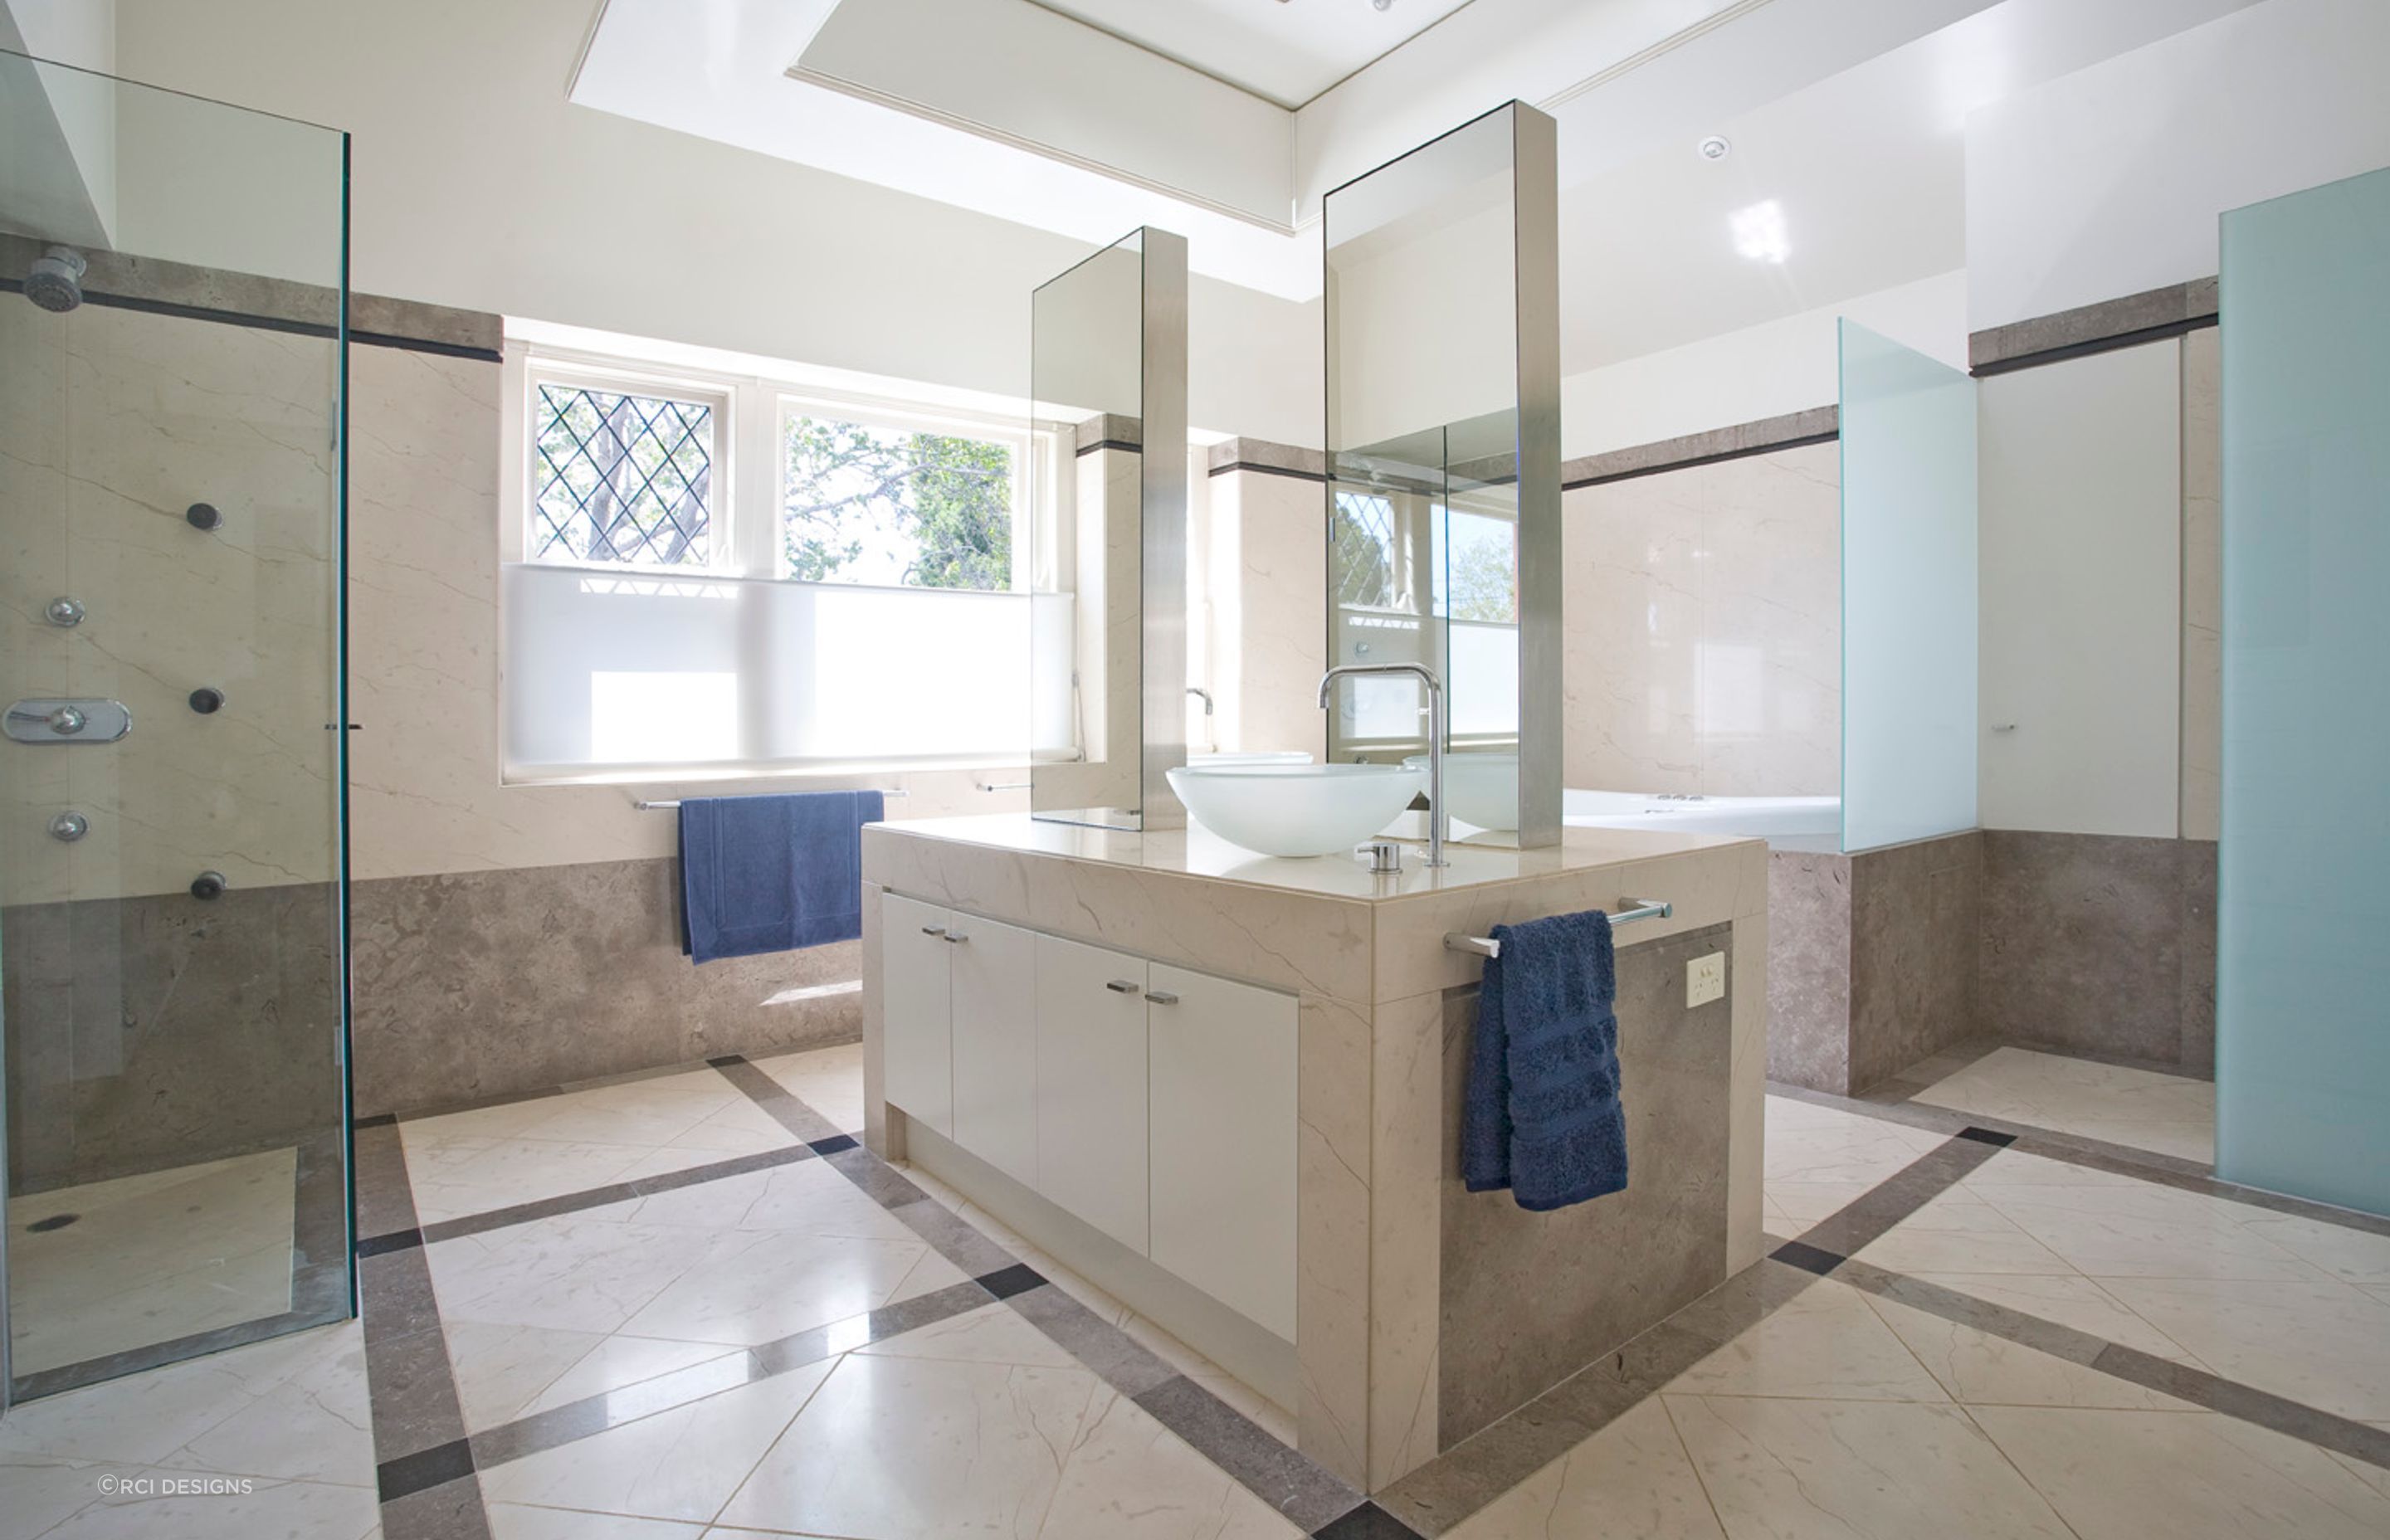 Free-standing bathroom mirrors are a great option if you're looking for an innovative way to position multiple mirrors in your bathroom. Featured project: Studley Park Bathroom